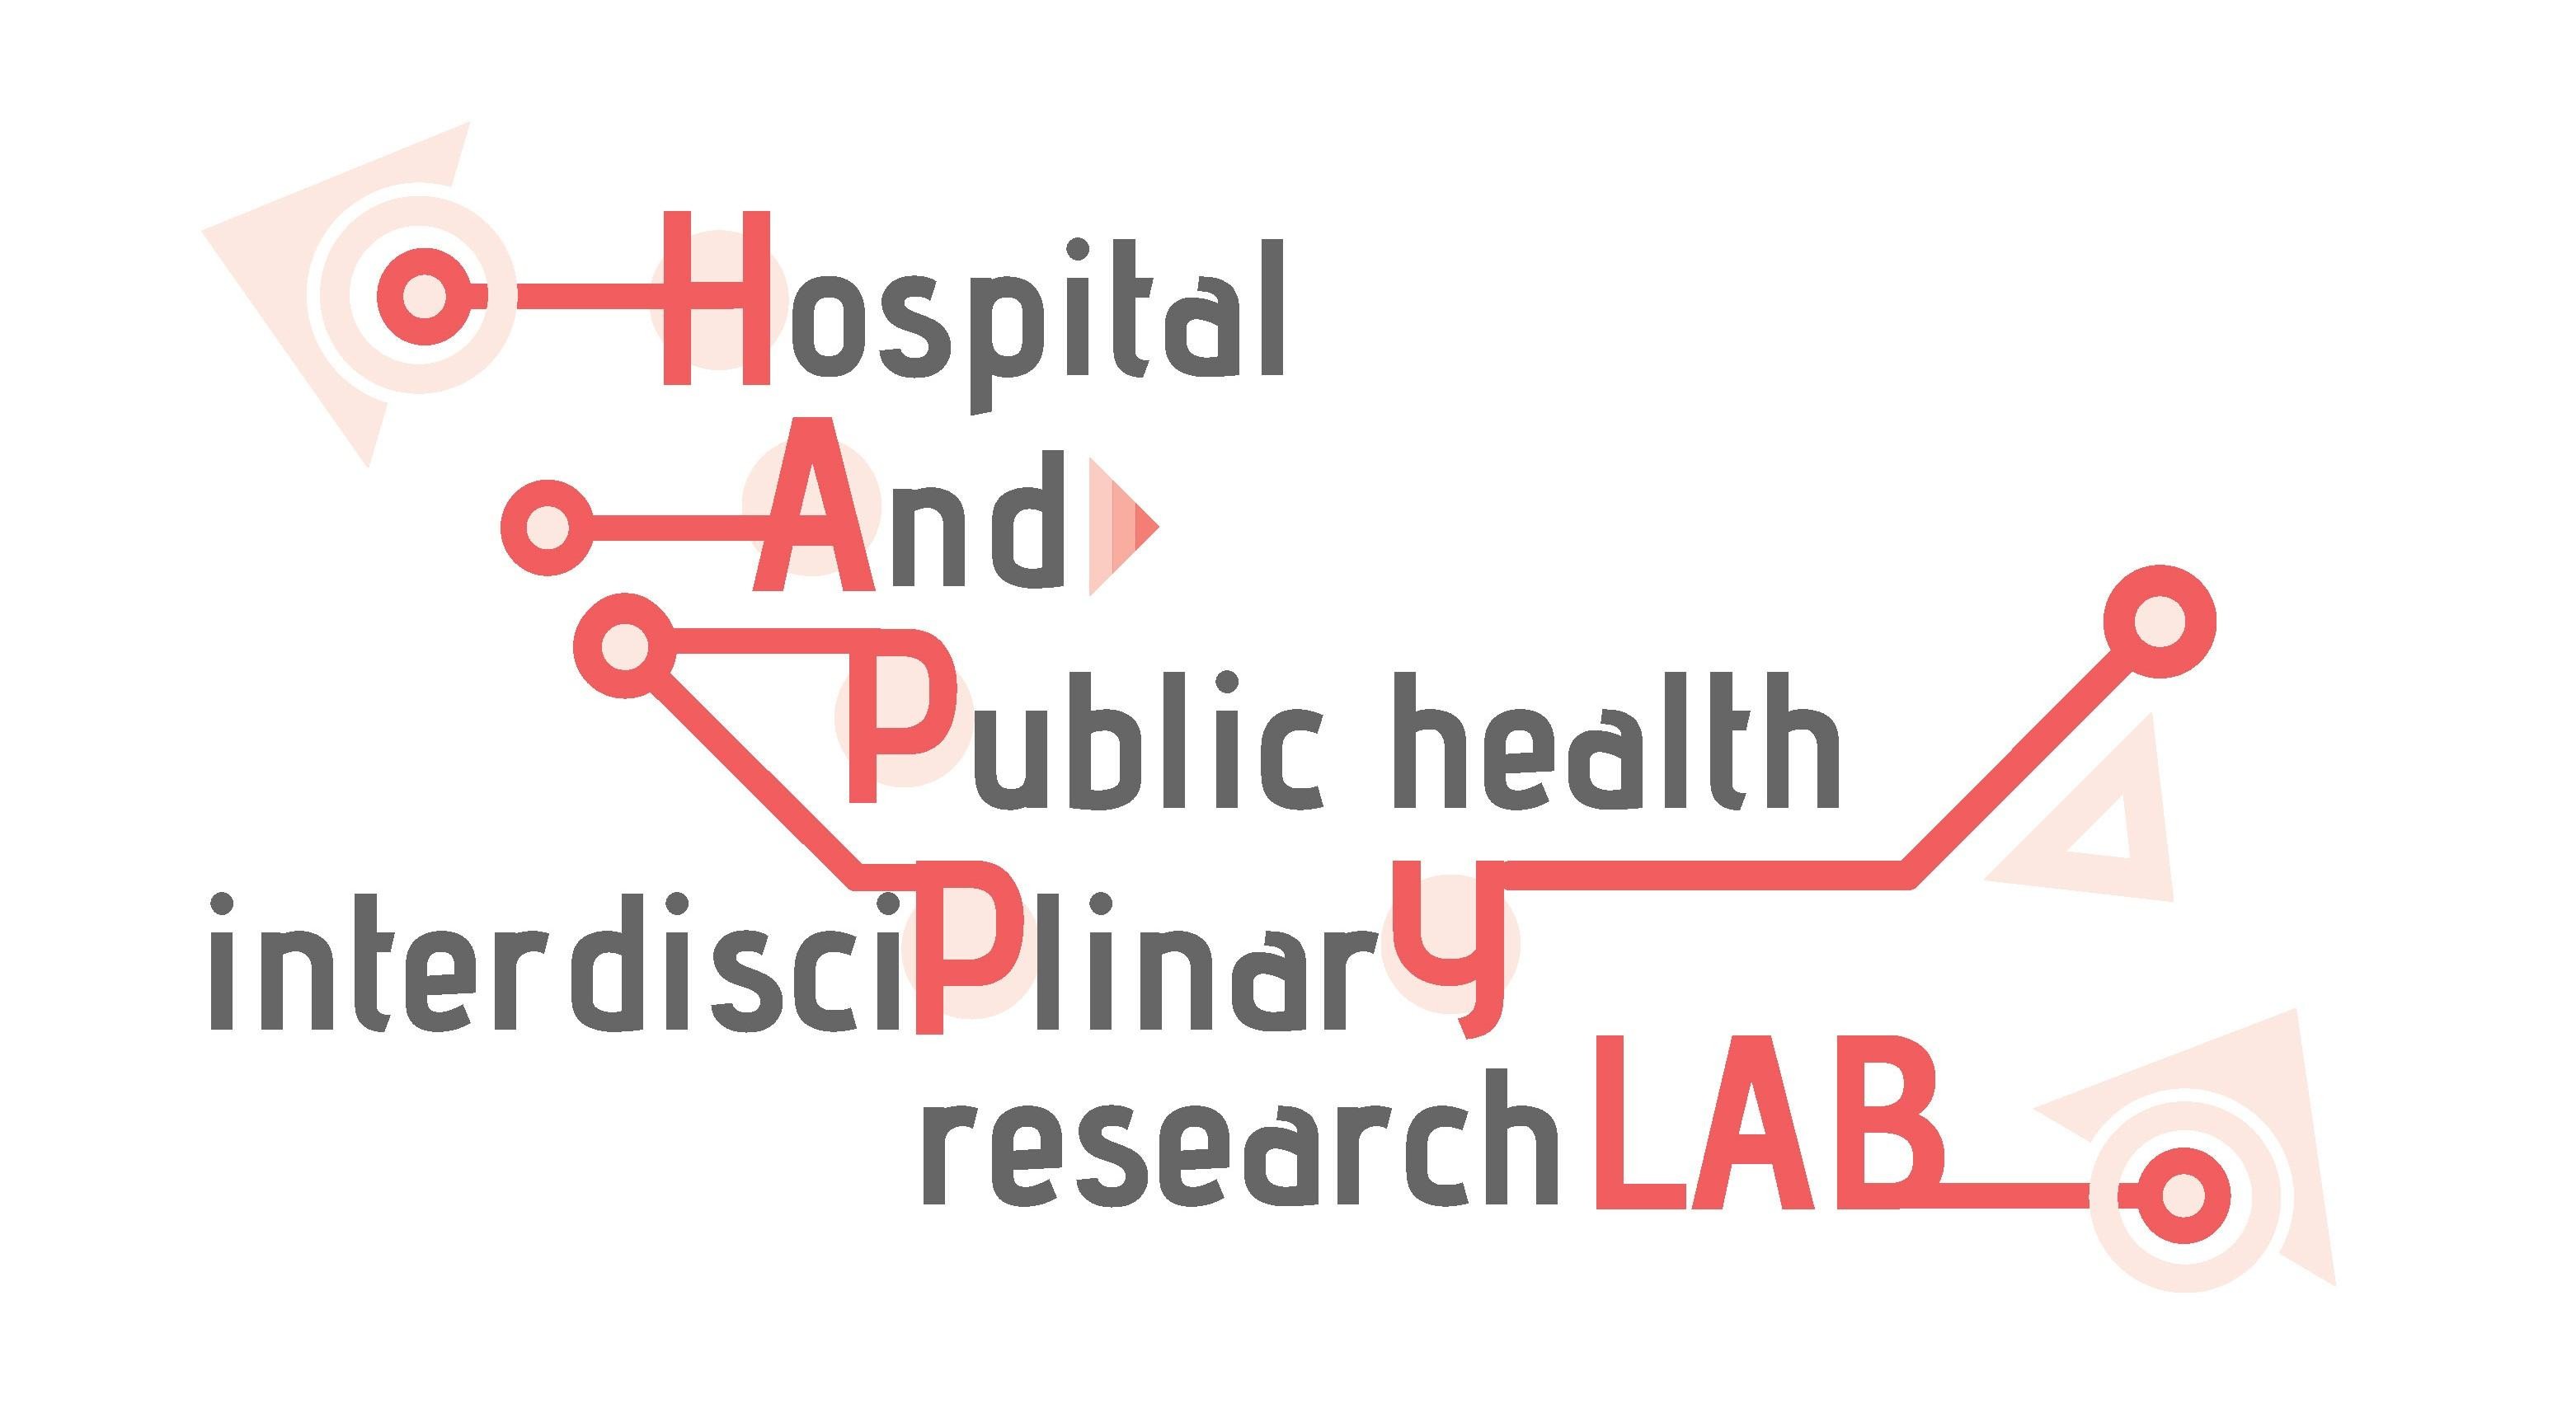 Hospital And Public health interdisciPlinarY research (HAPPY) Lab of the School of Public Health at the University of Maryland